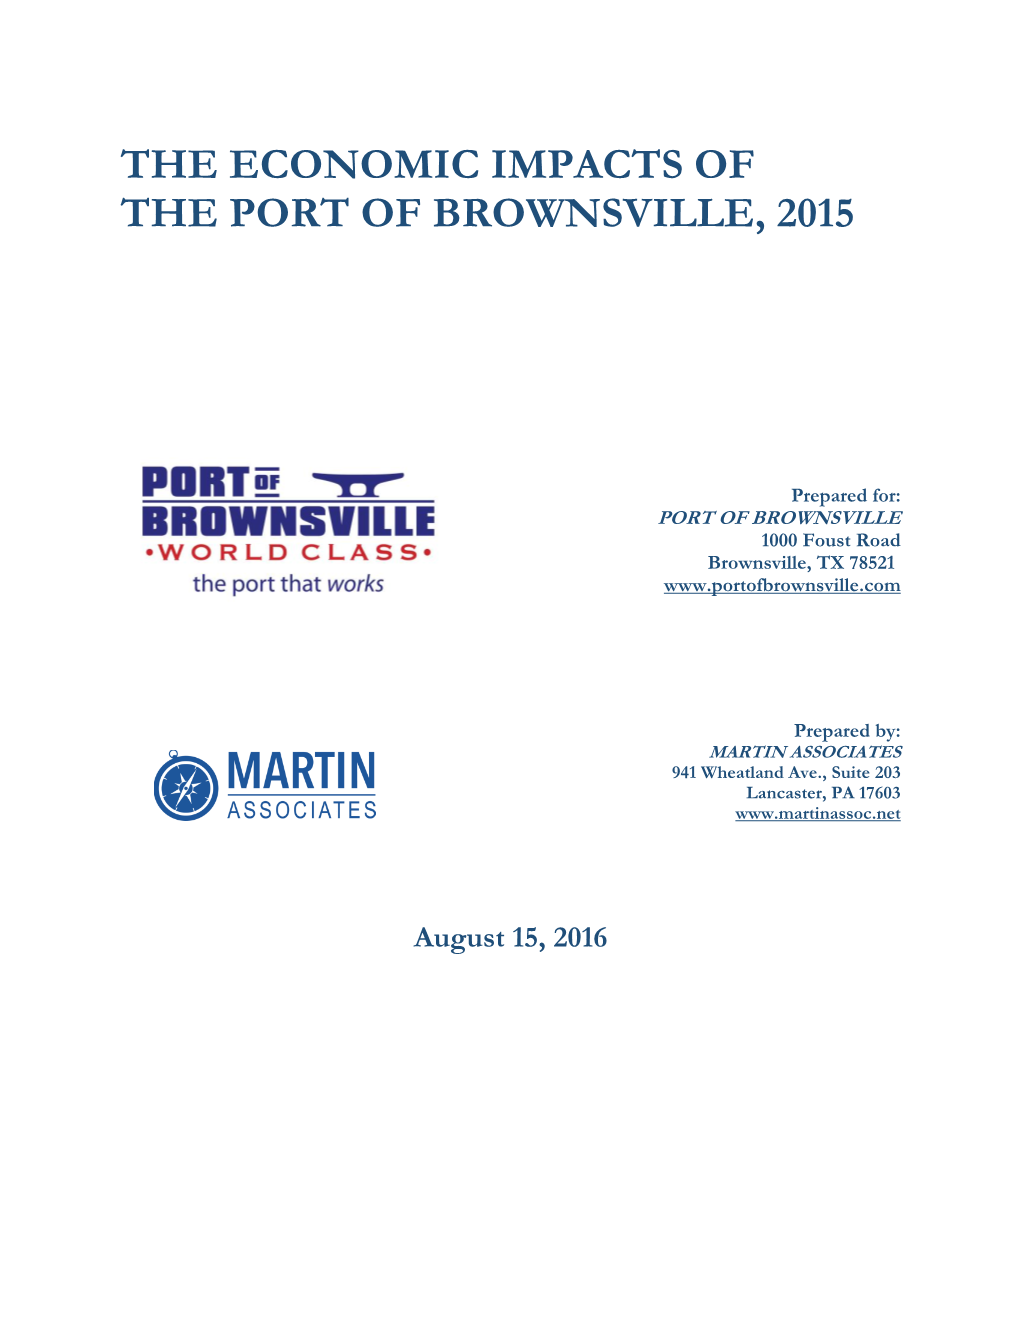 The Local & Regional Economic Impacts of the Port of Brownsville